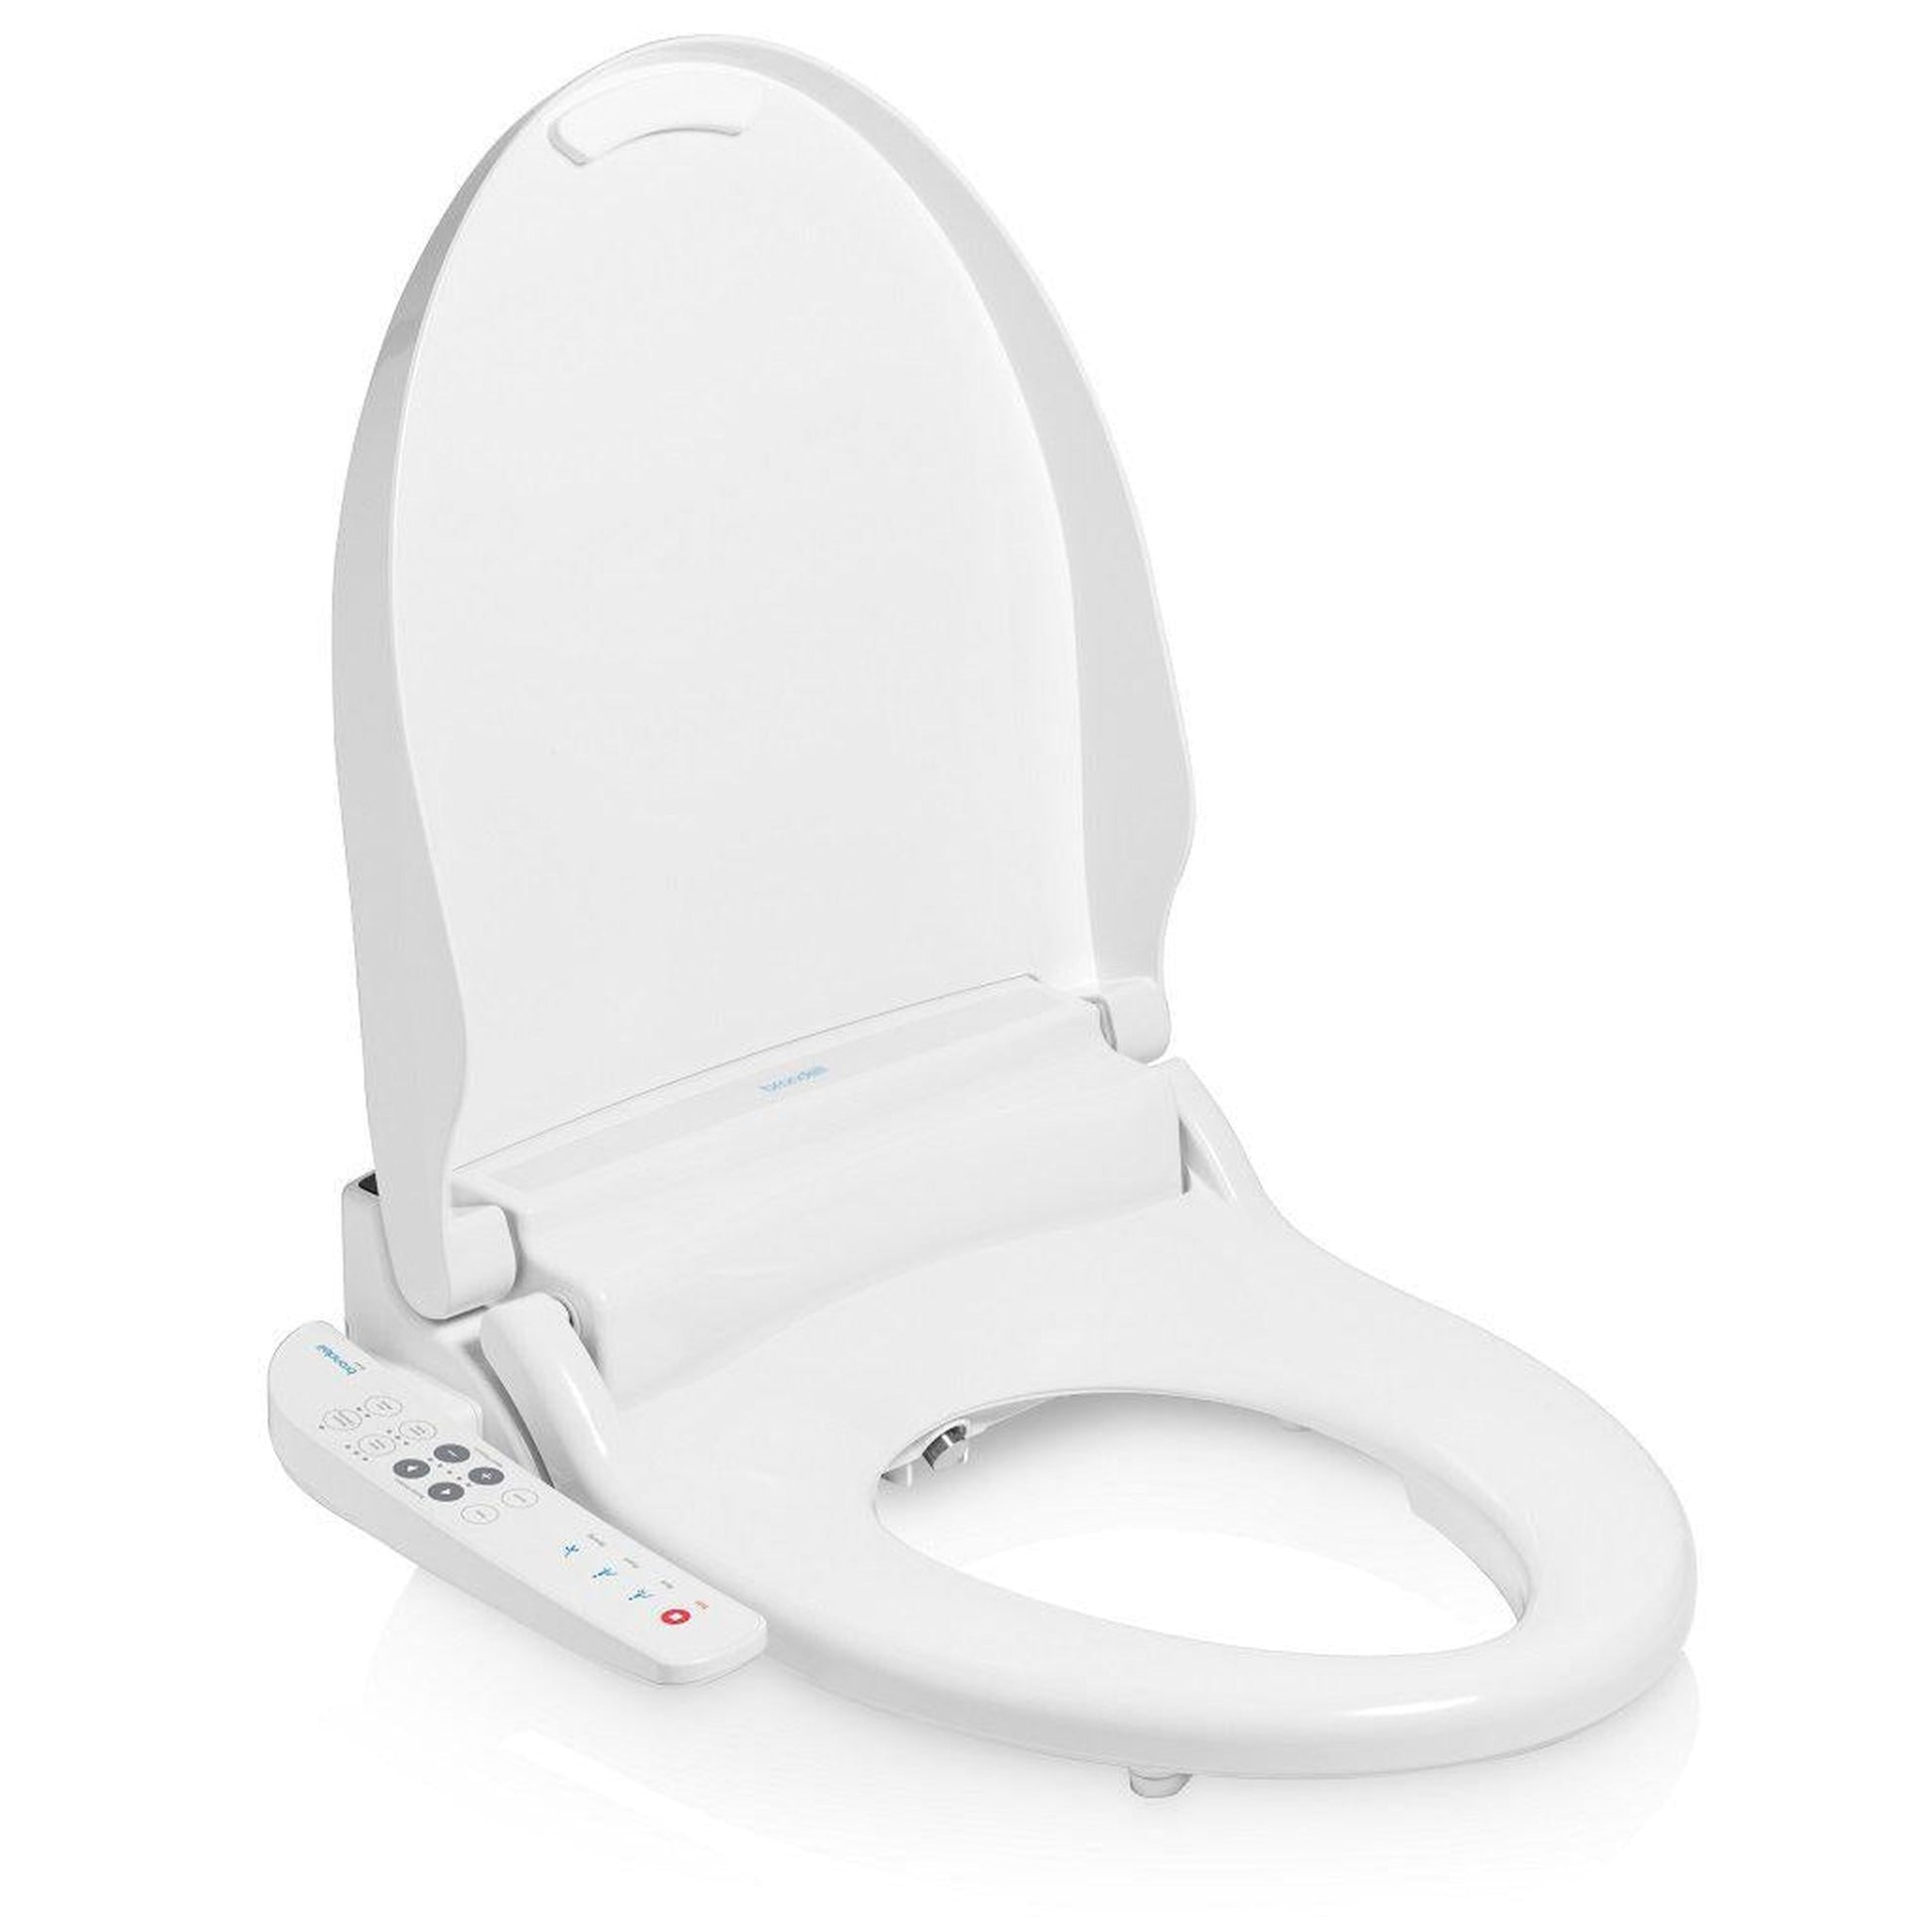 Brondell Swash Select BL67 19.5" White Round Electric Advanced Bidet Toilet Seat With Side Control Panel